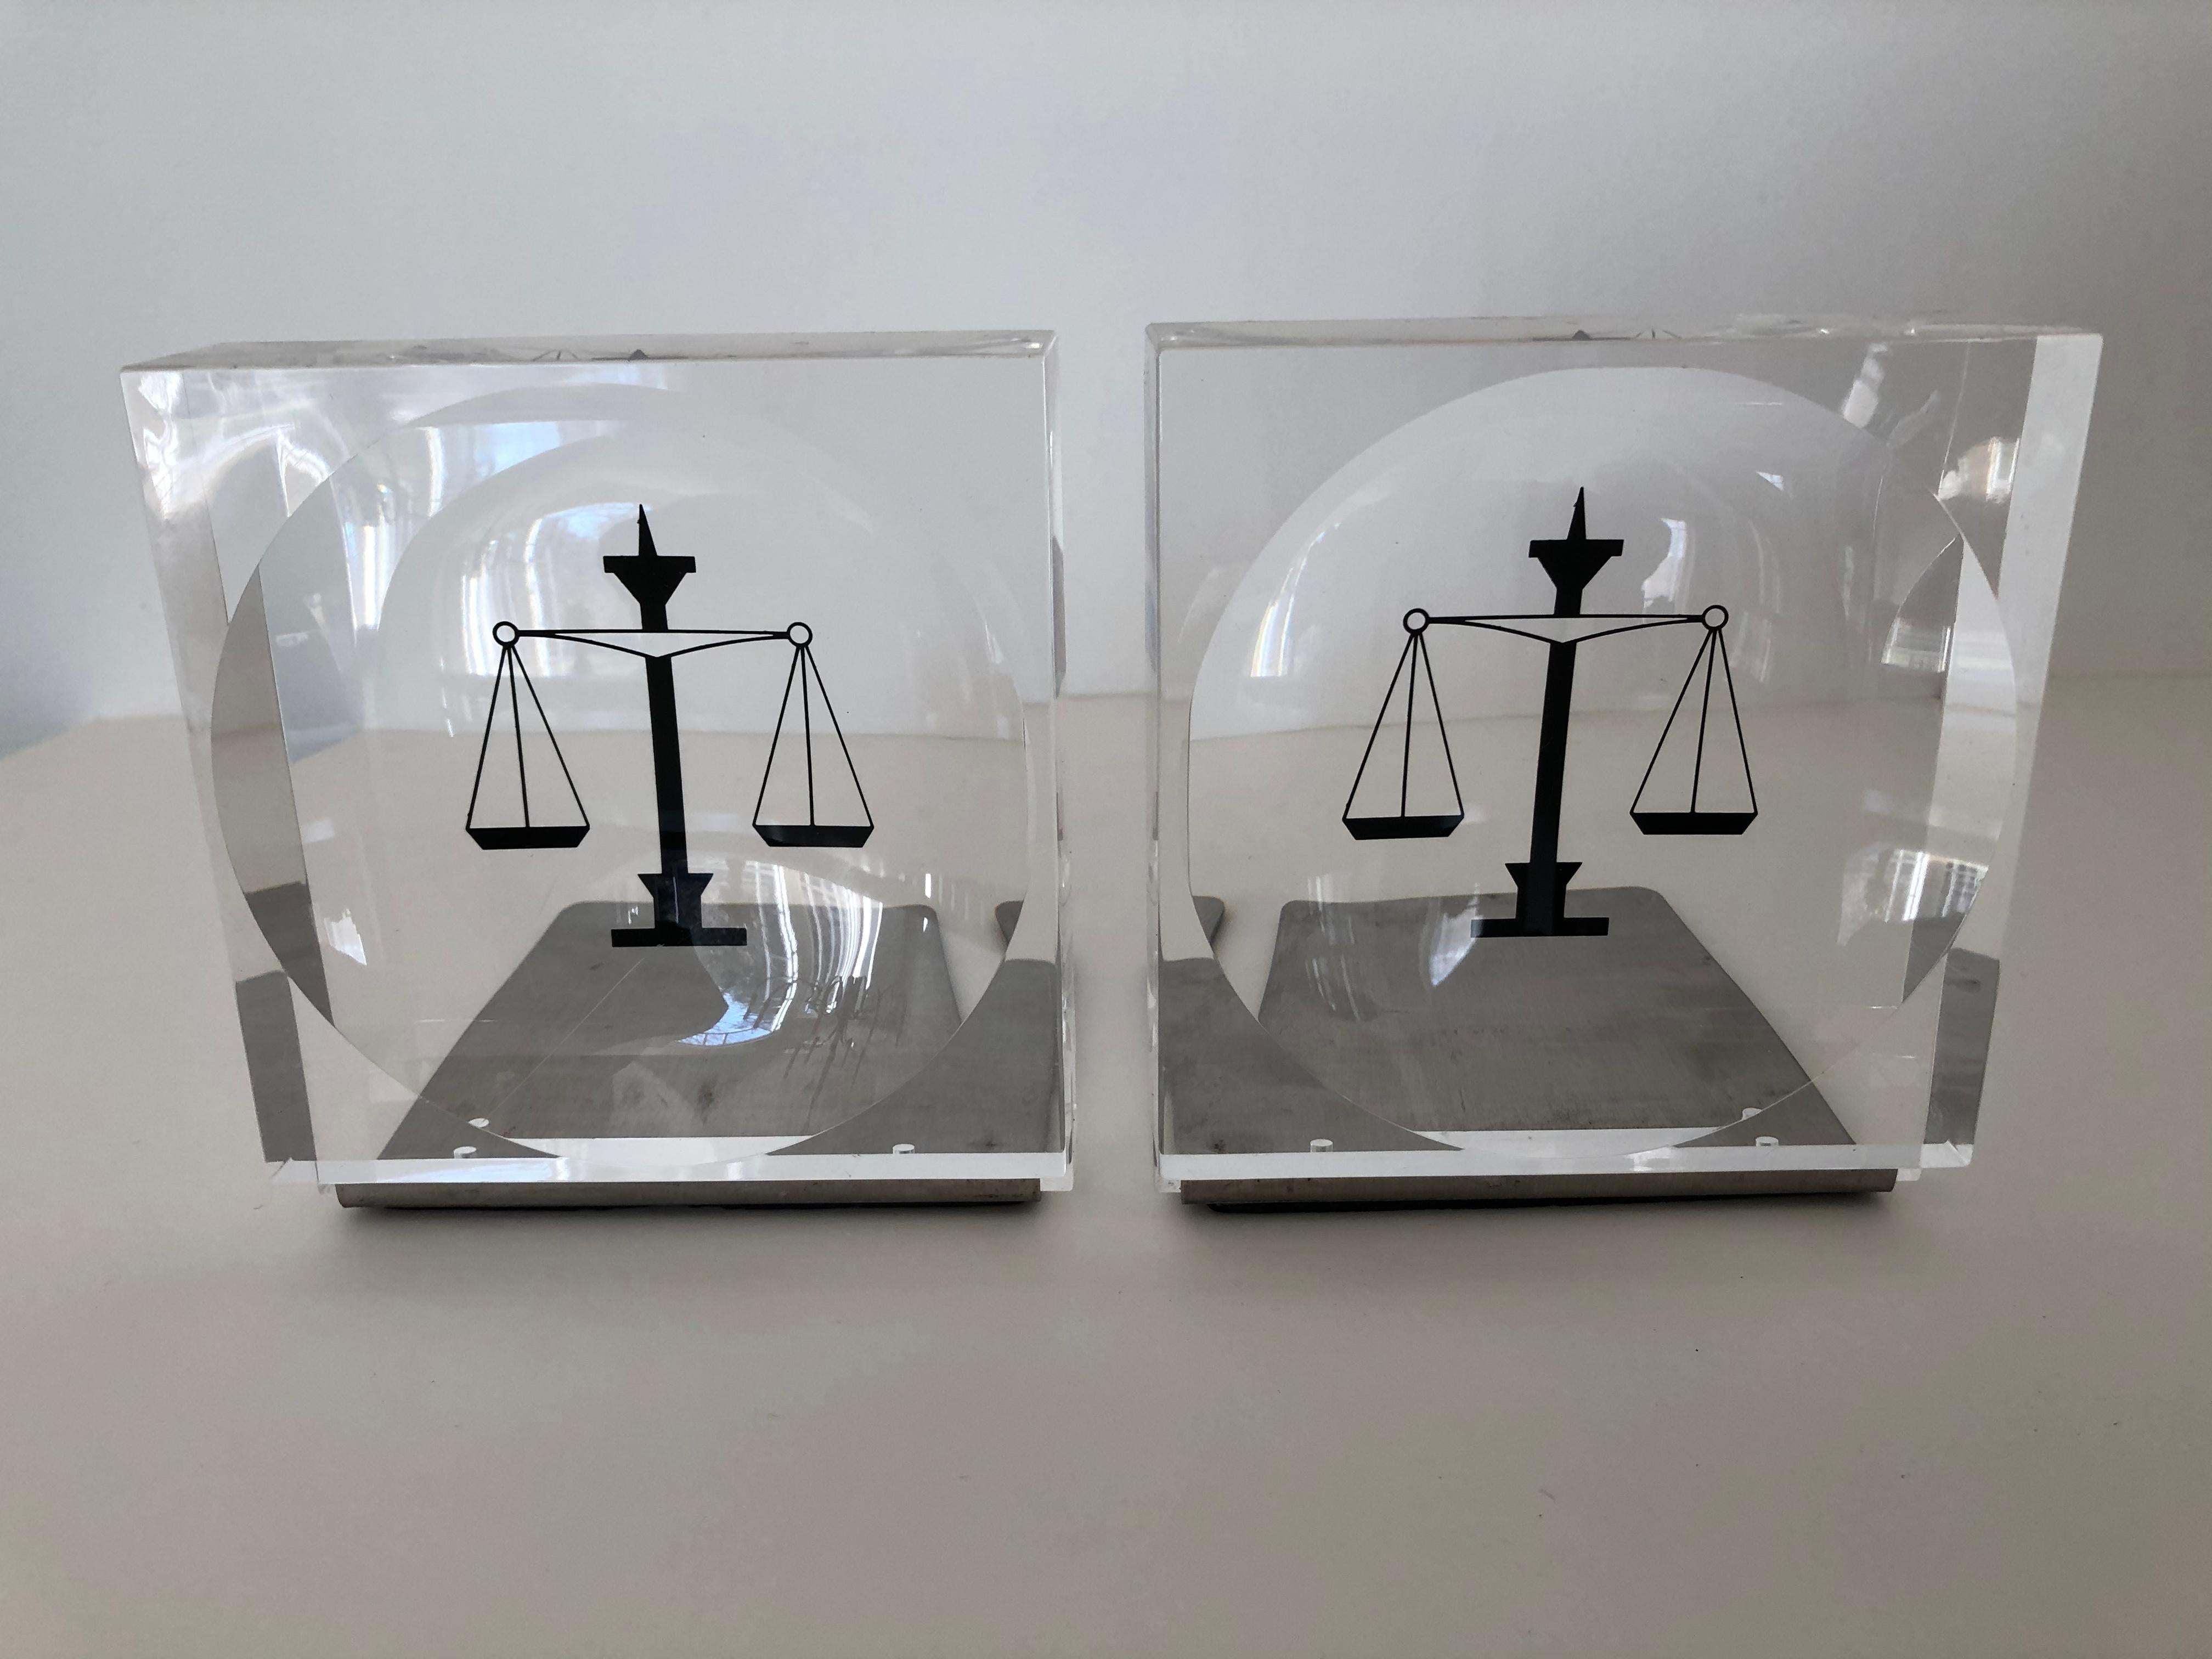 Lucite / acrylic black enameled scales of justice book ends, stainless steel return to fit books together as shown, nice for book display on shelving or desk. Rubber grips to bottom. Each book end measures 4.25 in depth, together with books about